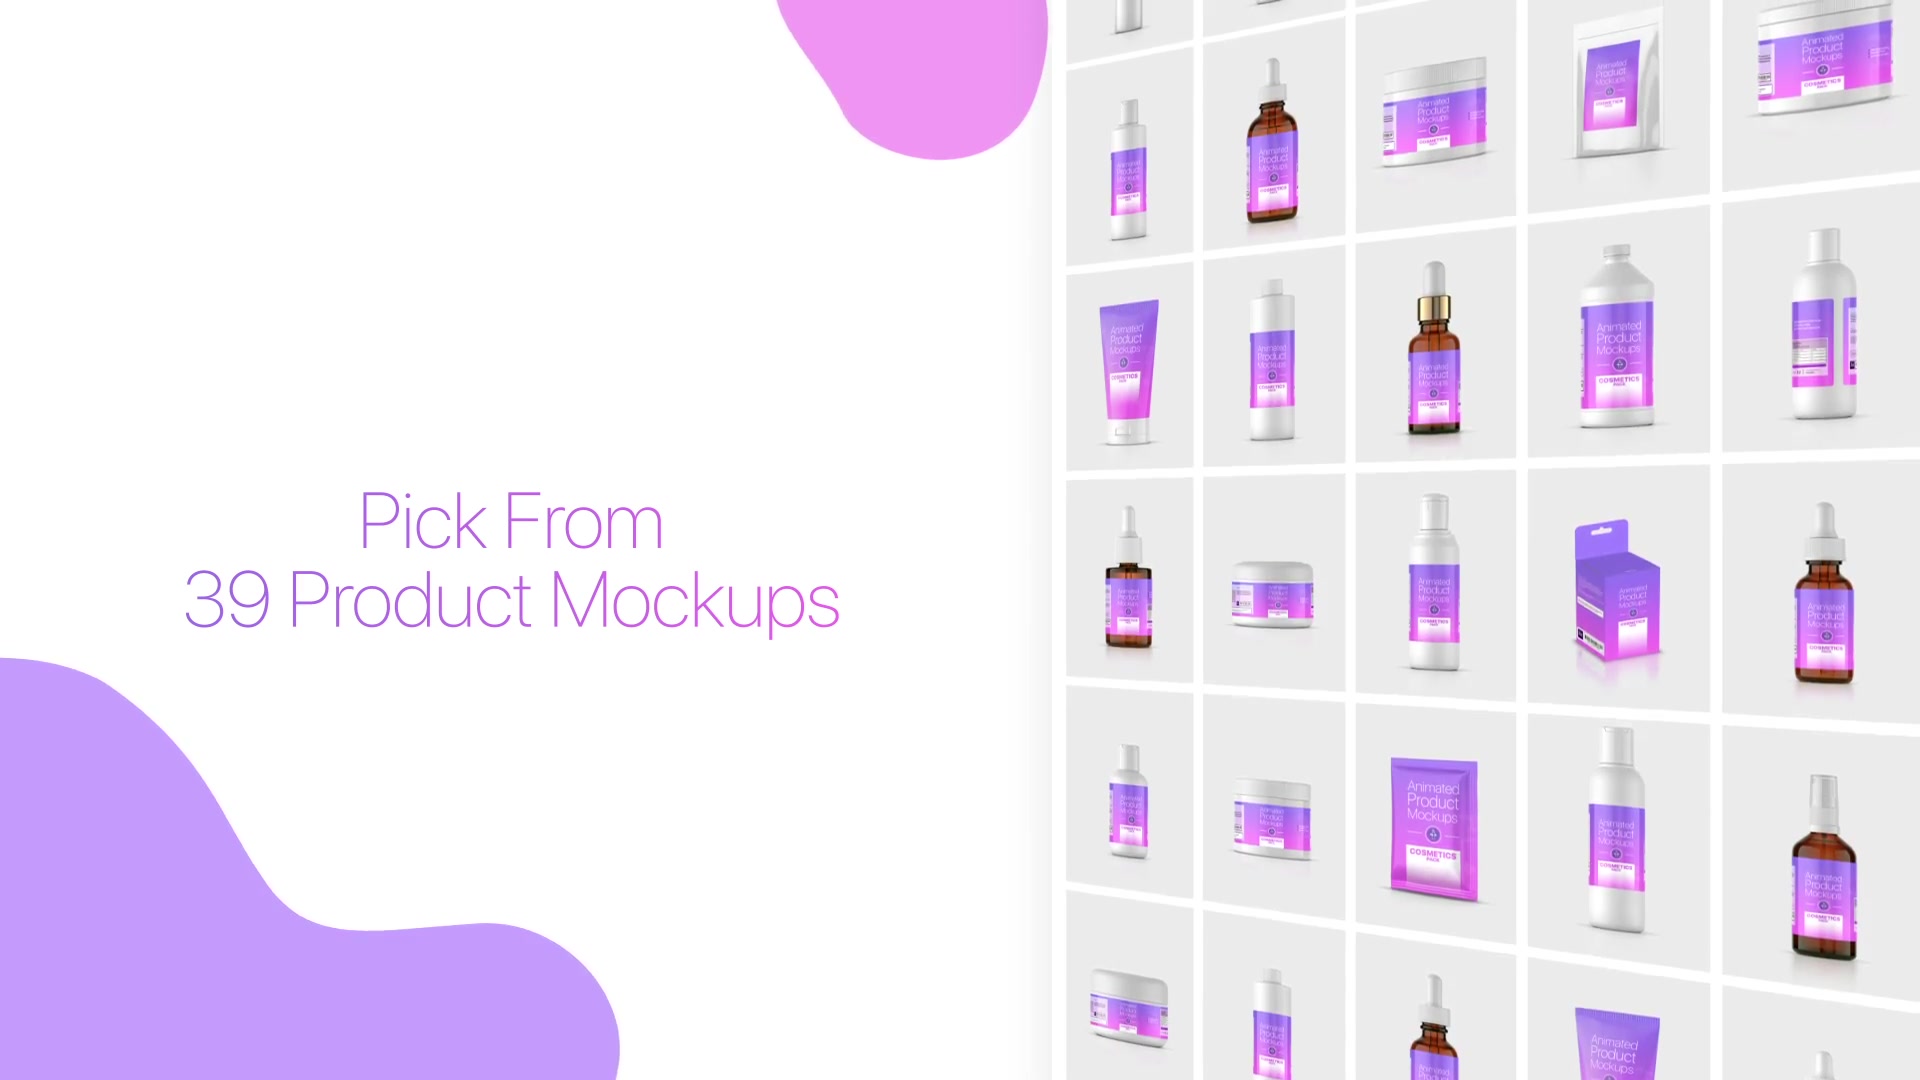 Download Animated Product Mockups Cosmetics Pack Videohive 25513188 ...